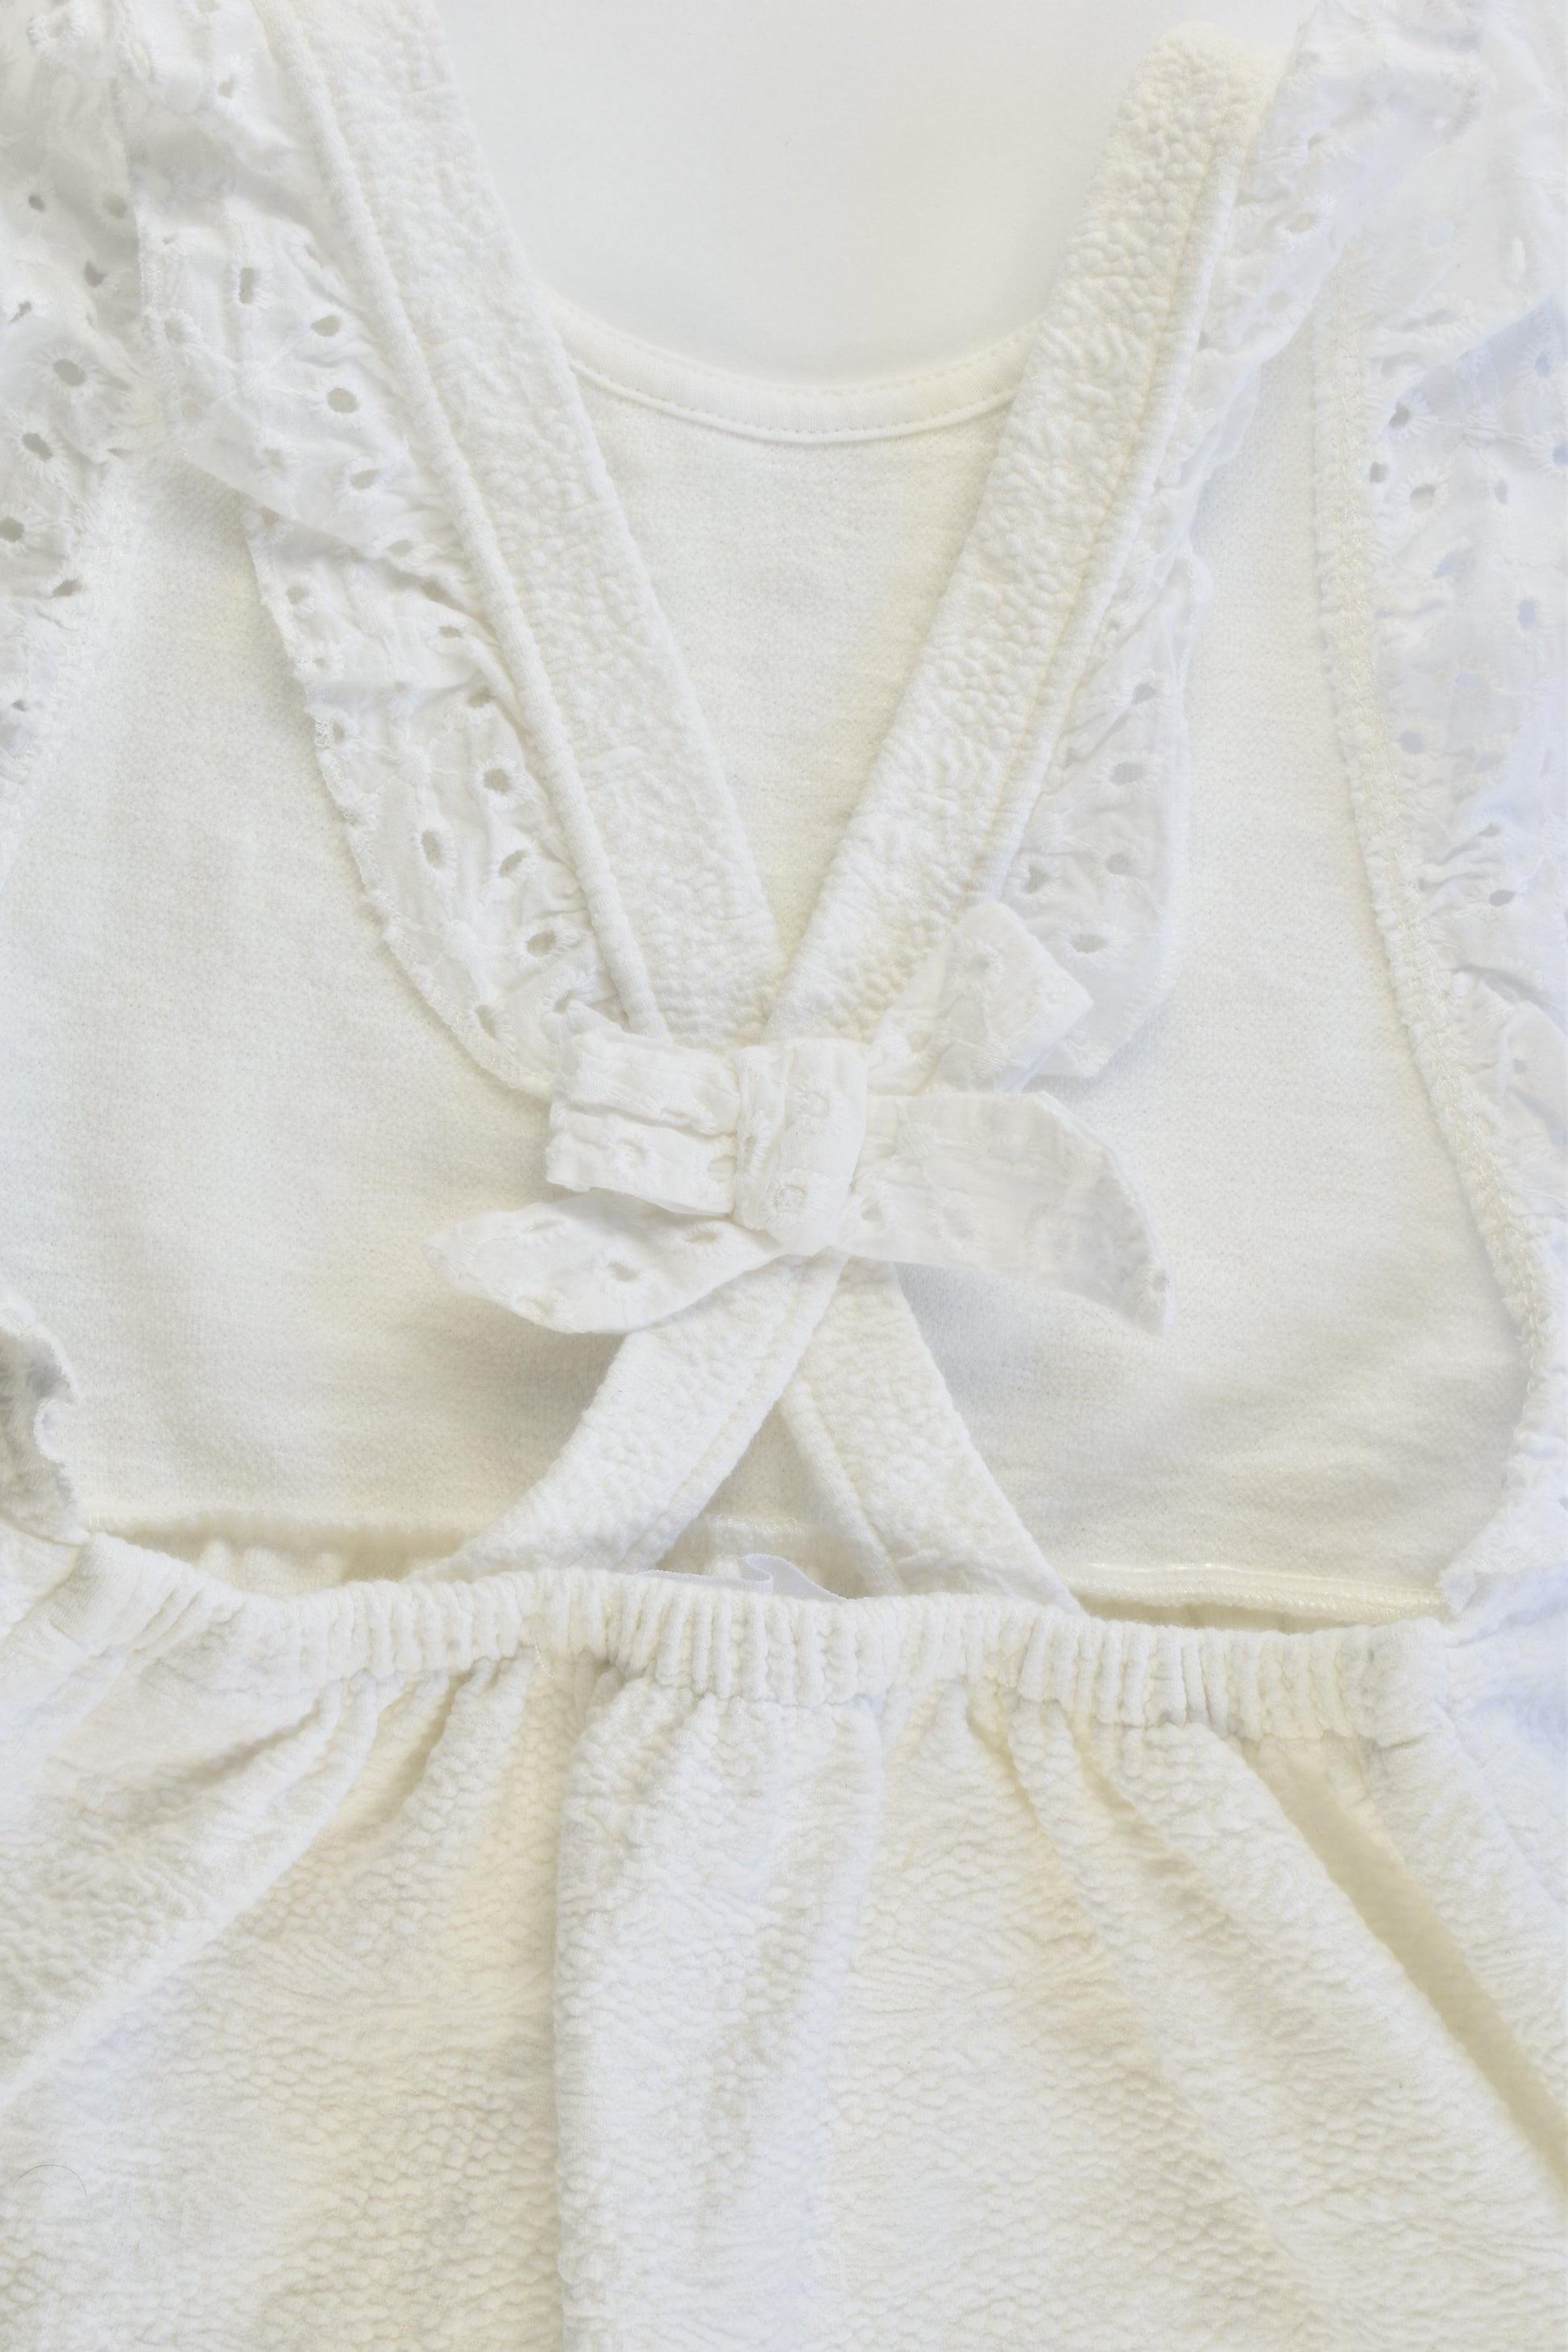 NEW Zara Size 2 (18-24 months, 92 cm) Dress with Lace Details